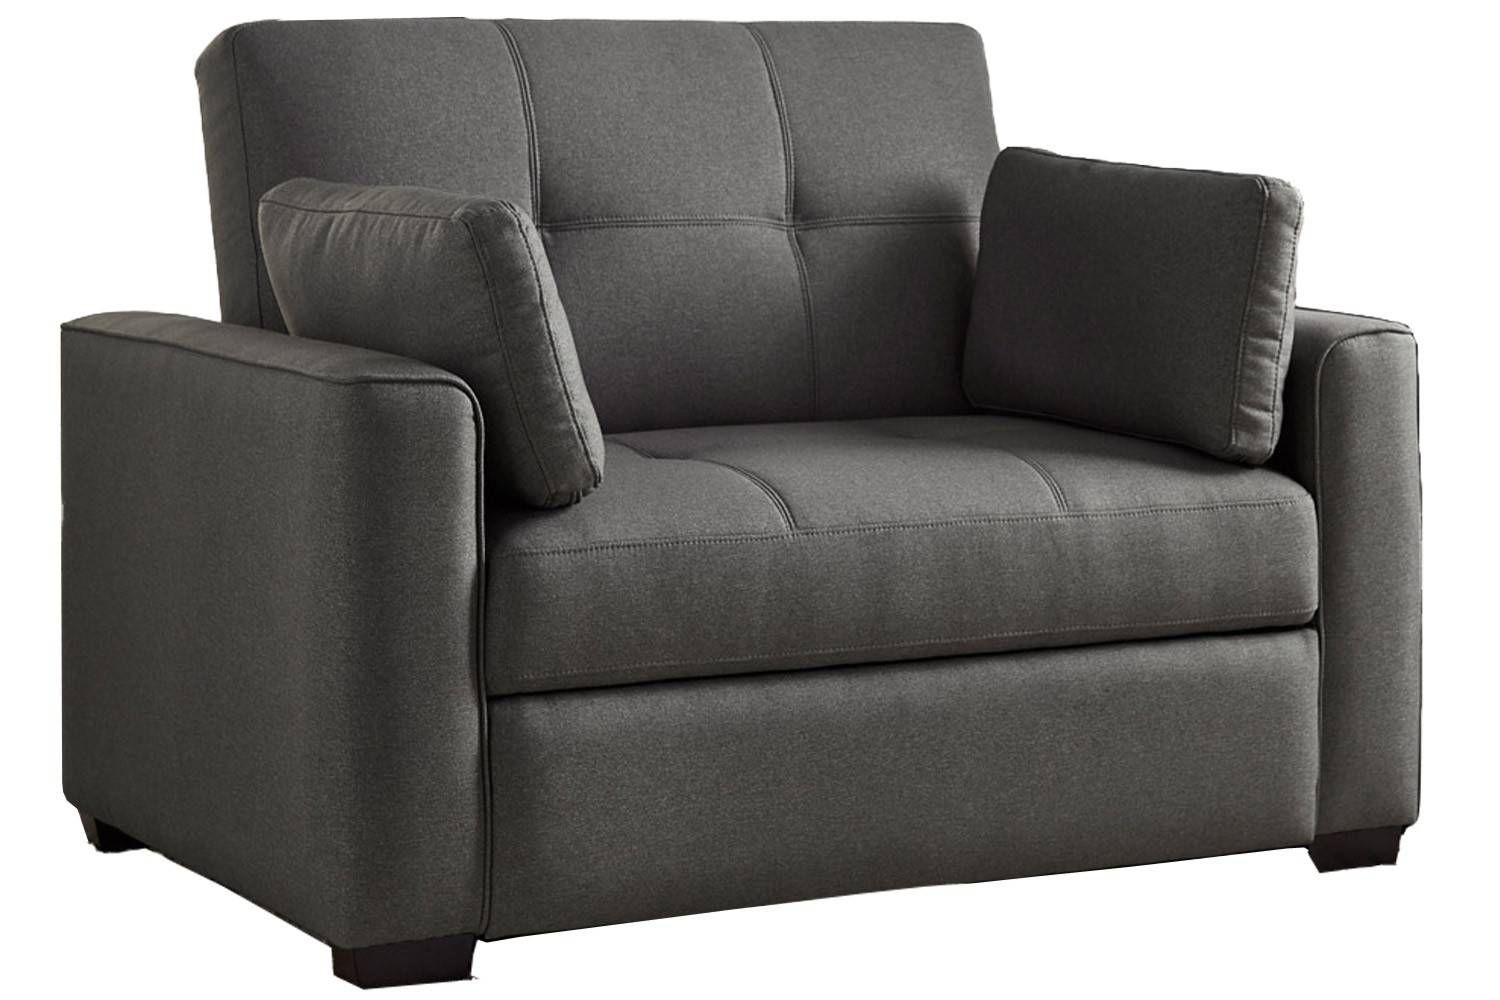 Sofas Center : Twin Sofa Chairs For Salesofa Chair Uk Ikea Intended For Sofa Bed Chairs (View 21 of 30)